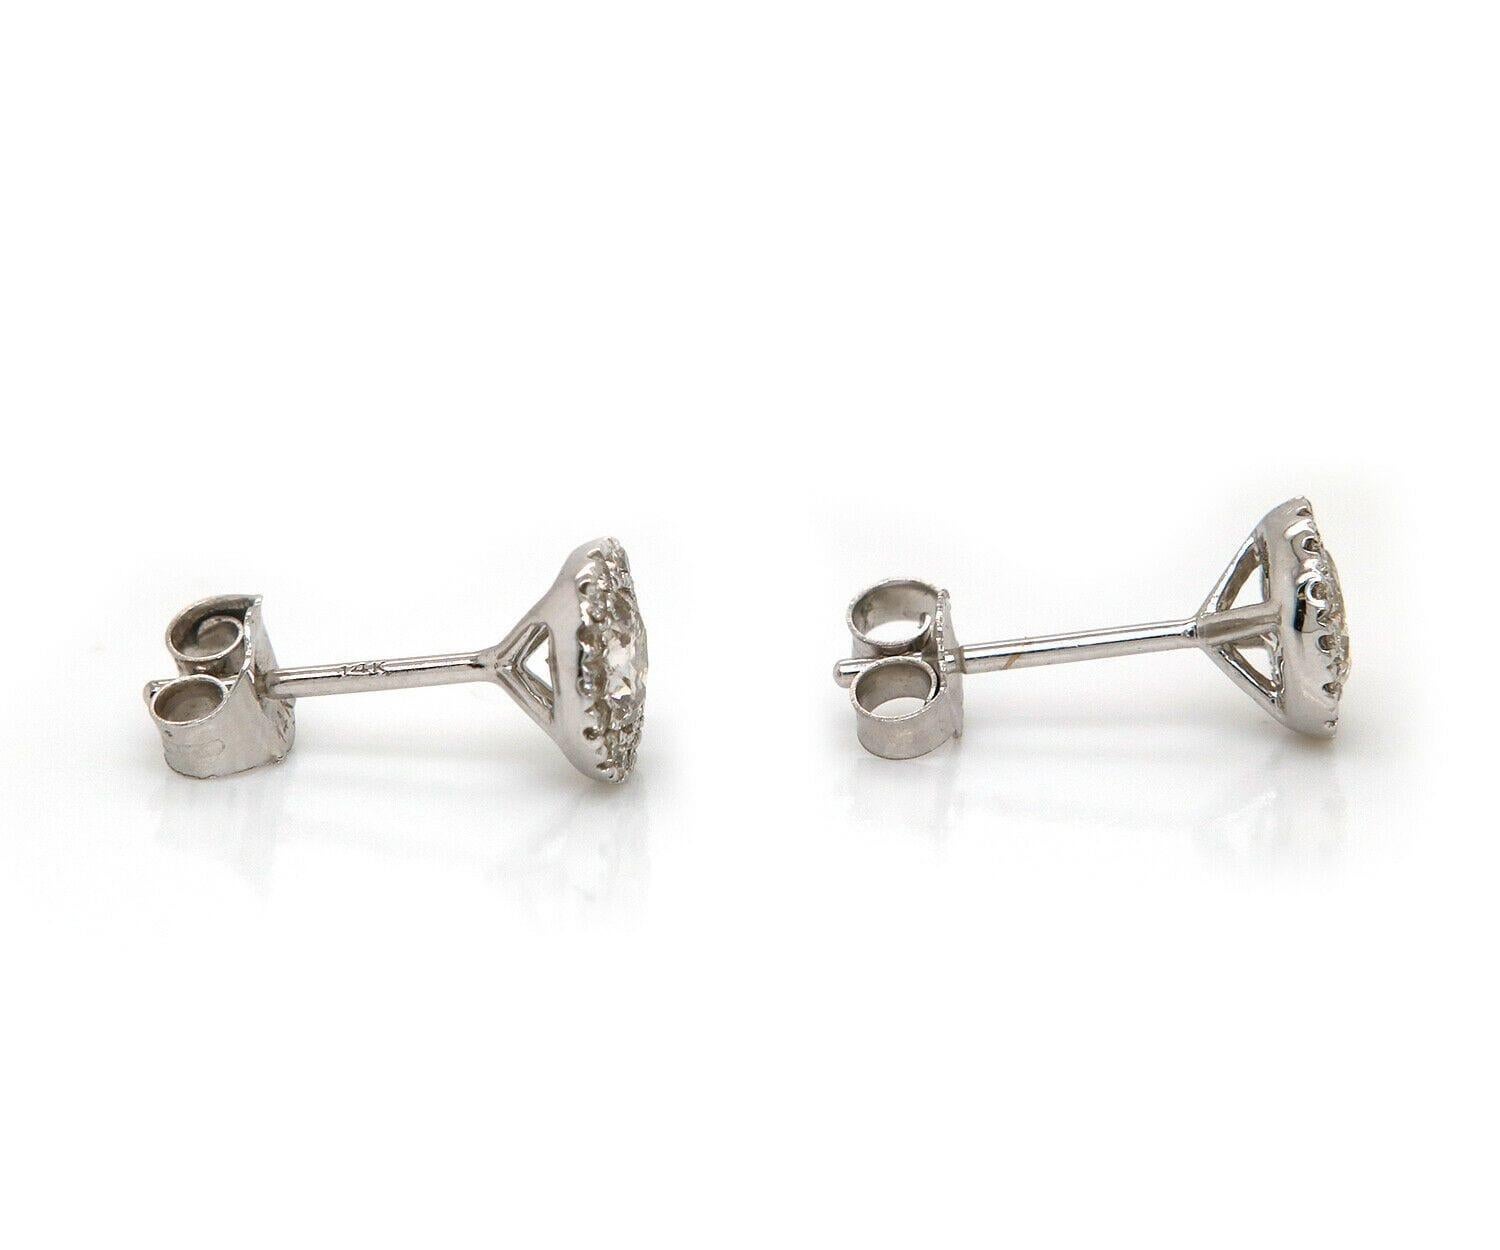 New 0.76ctw Diamond Halo Stud Earrings in 14K White Gold In New Condition For Sale In Vienna, VA